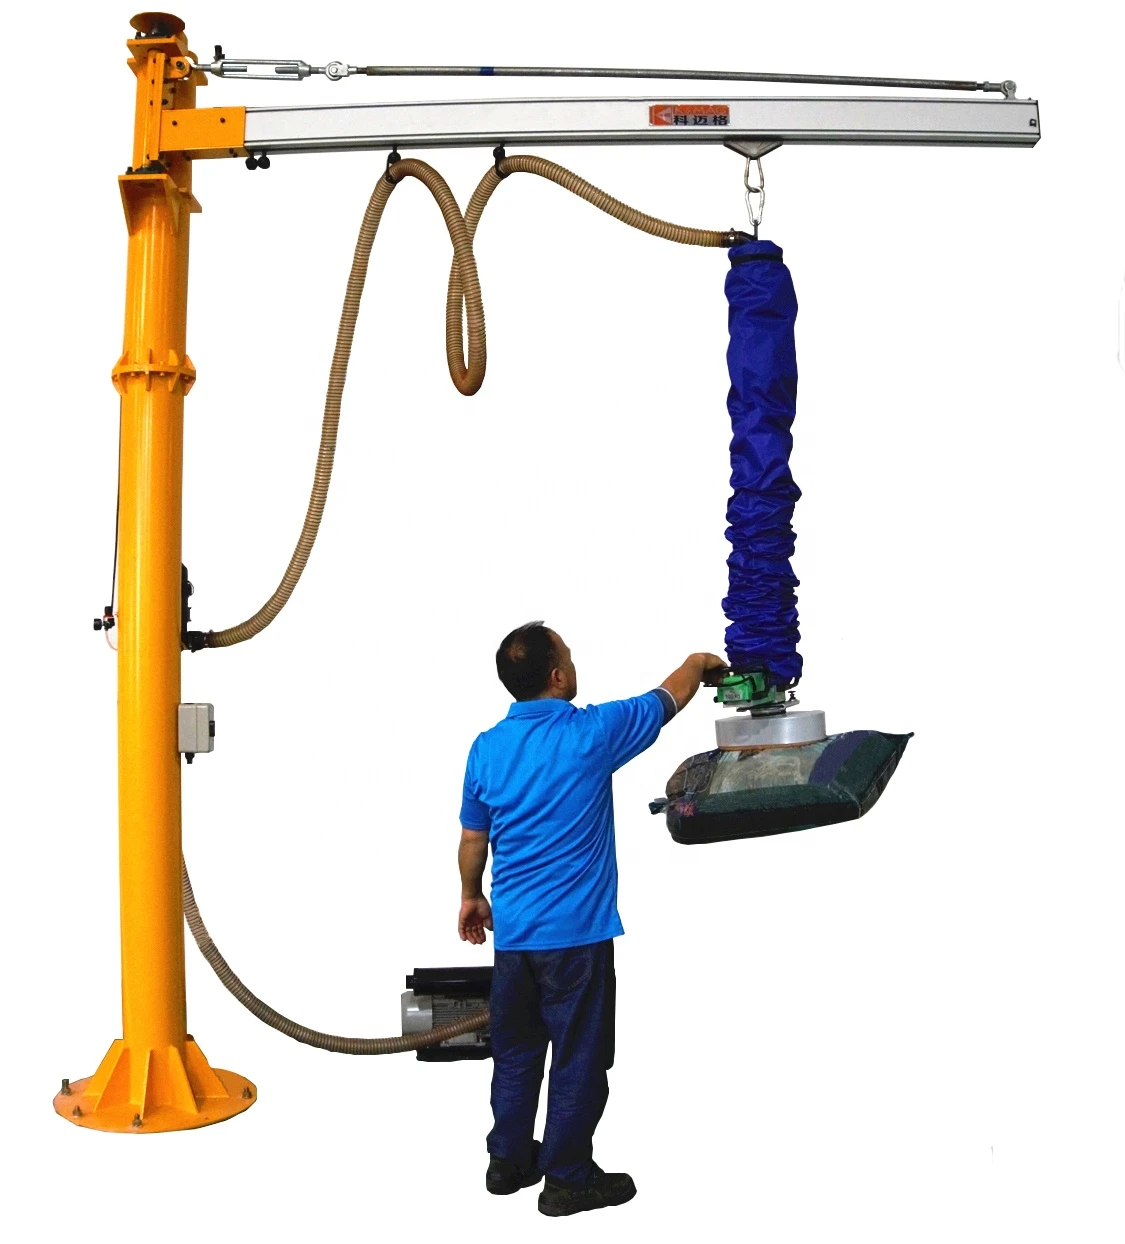 Factory hot product bag vacuum lifter material handling equipment made in china